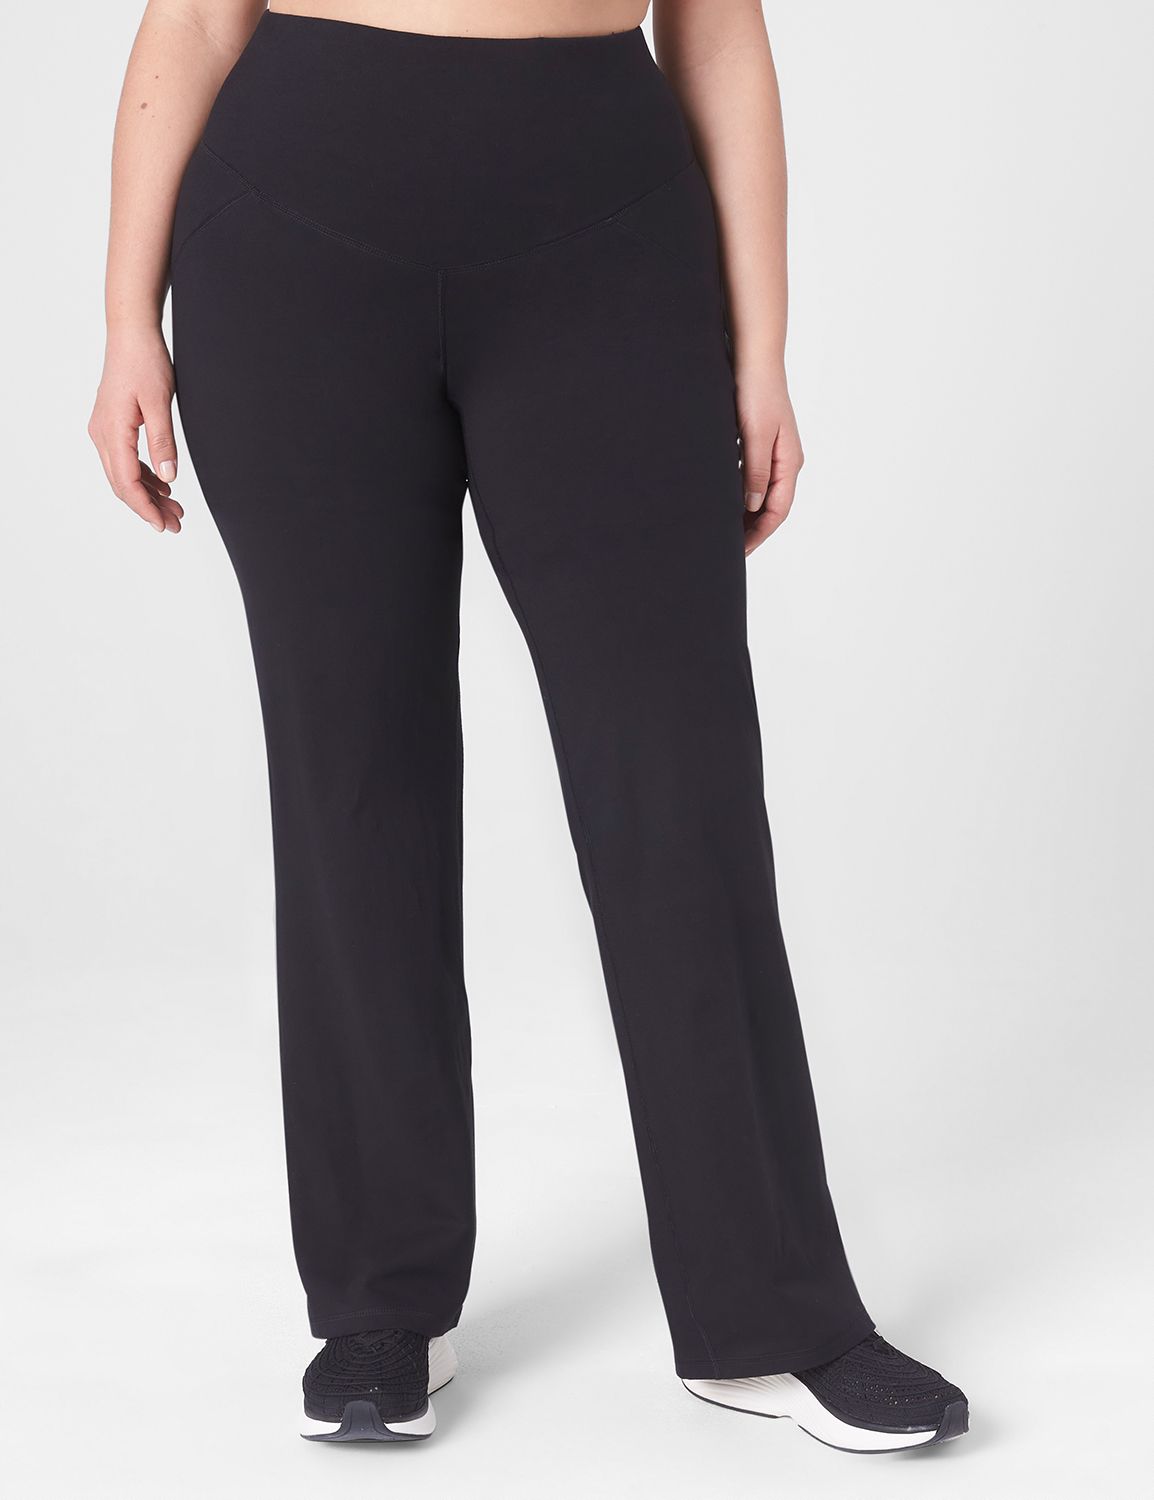 LIVI Yoga Pant with Smoothing Control Tech